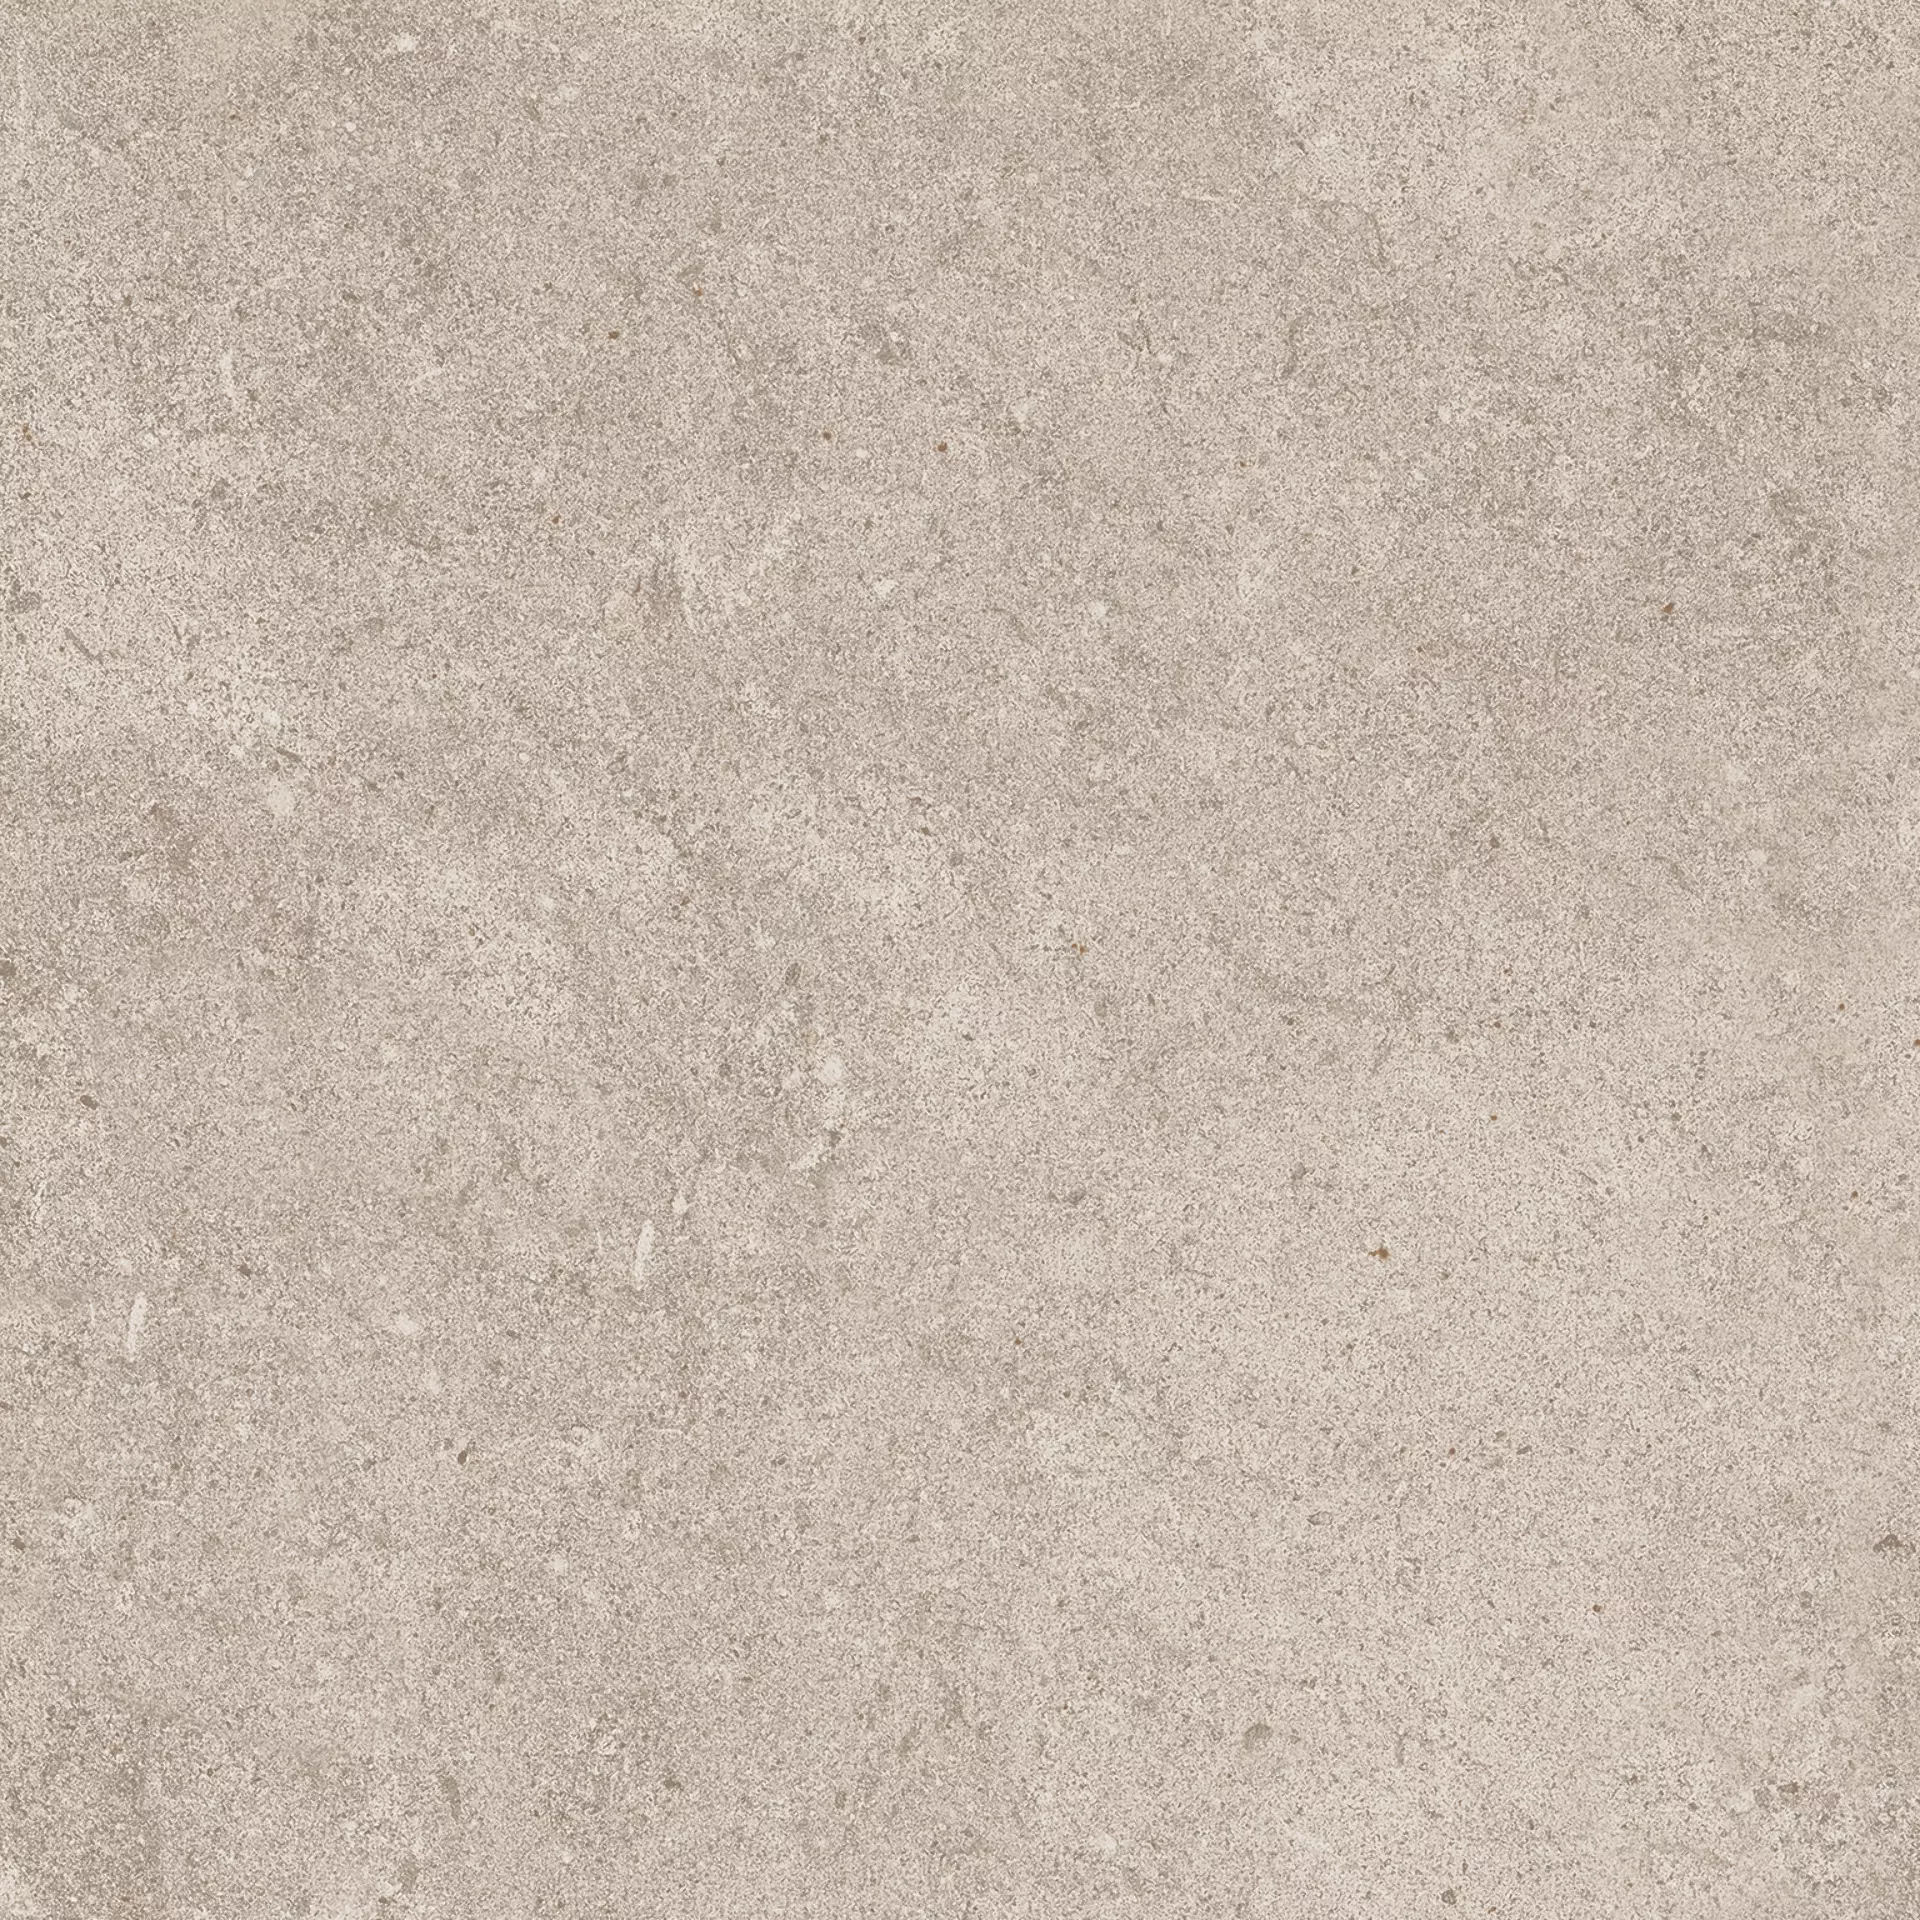 Sant Agostino Highstone Greige Natural CSAHS7GR60 60x60cm rectified 10mm